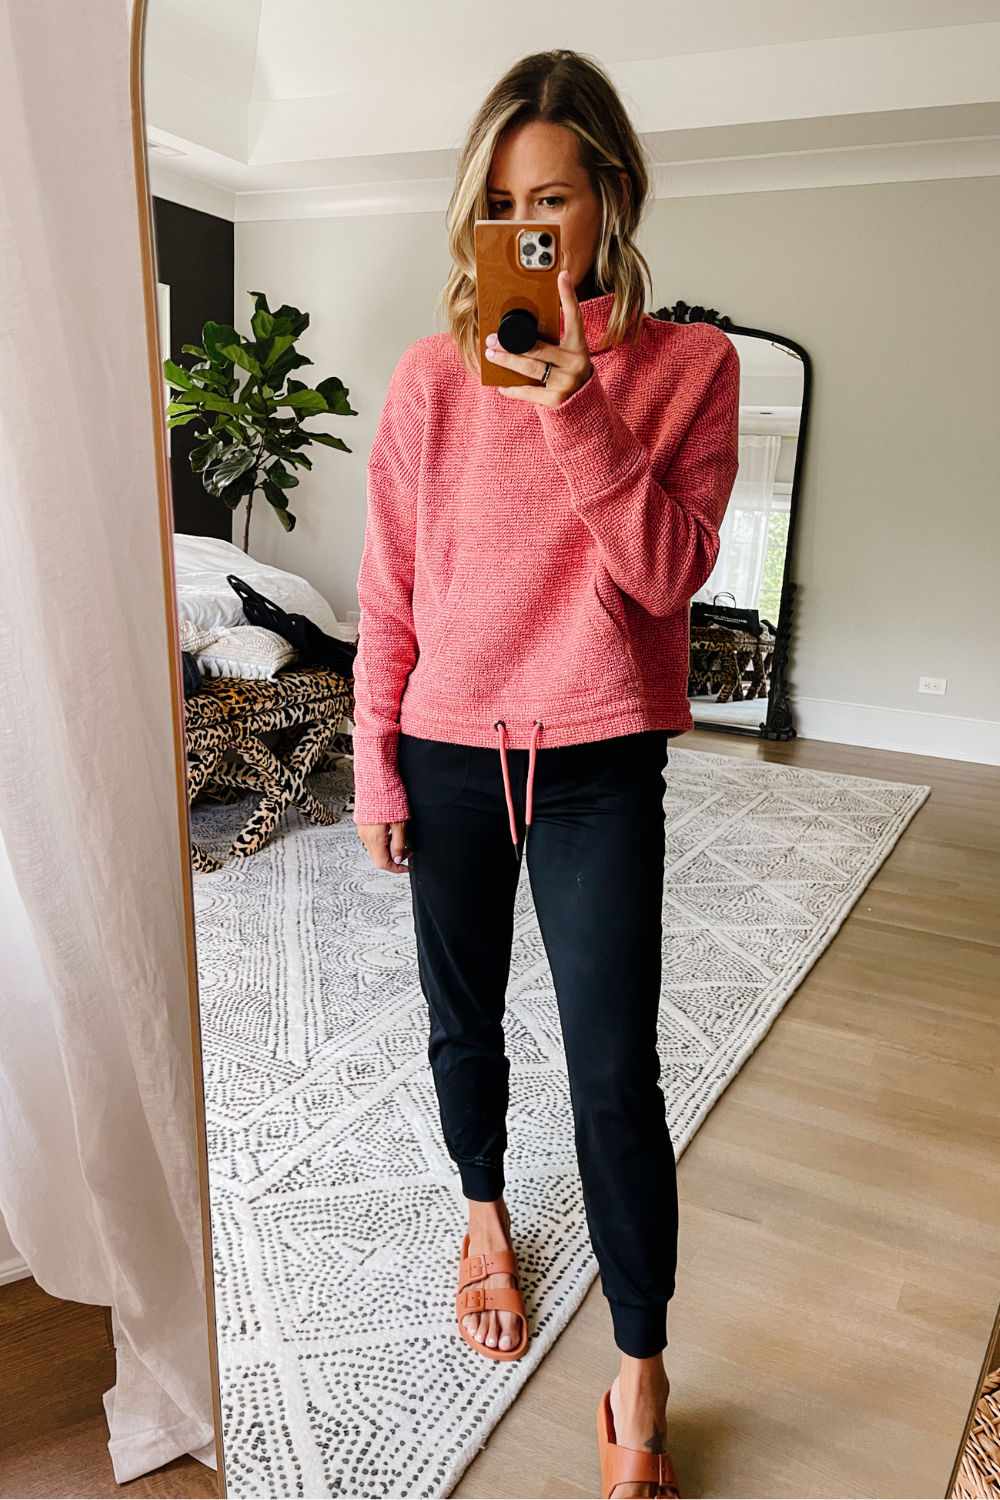 Suzanne wearing a Sweaty Betty pullover and joggers